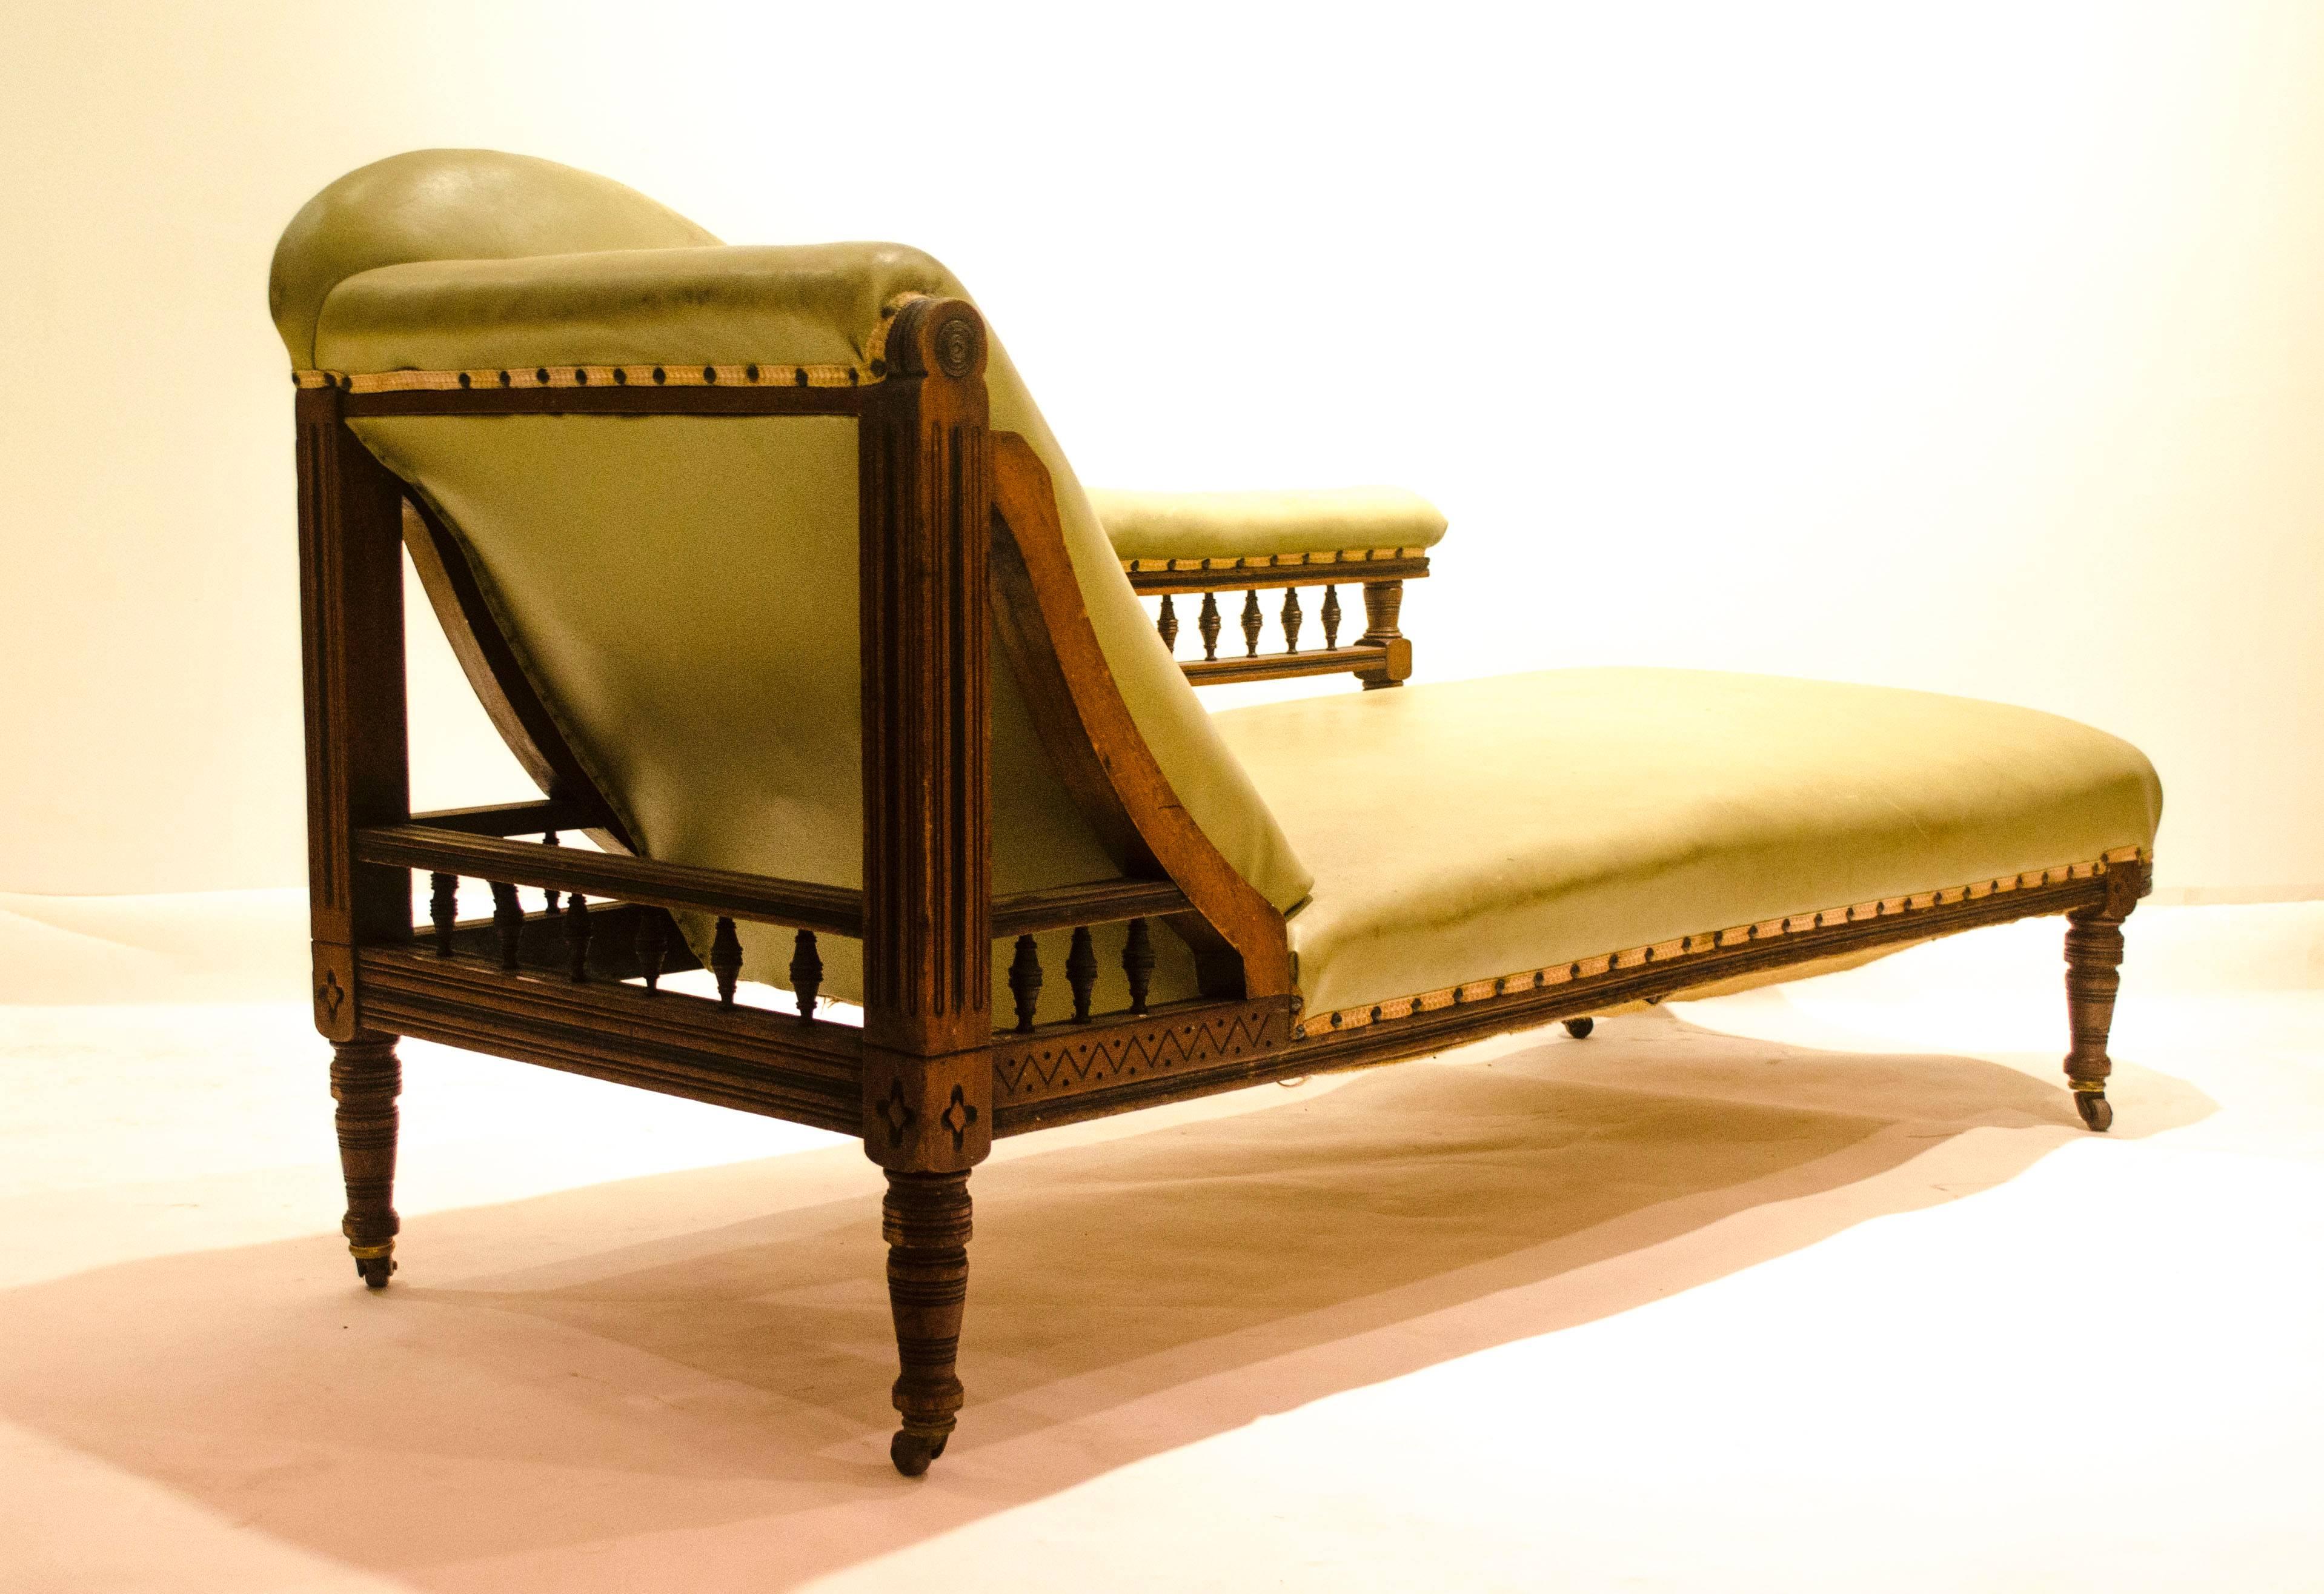 Thomas Collcutt (attributed) for Collinson and Lock.
An Aesthetic Movement Walnut and ebonised chaise longue, with triangular 'A' frame to one end, ebonised tramlines throughout, with a lower turned gallery and turned feet, the semi upholstered back